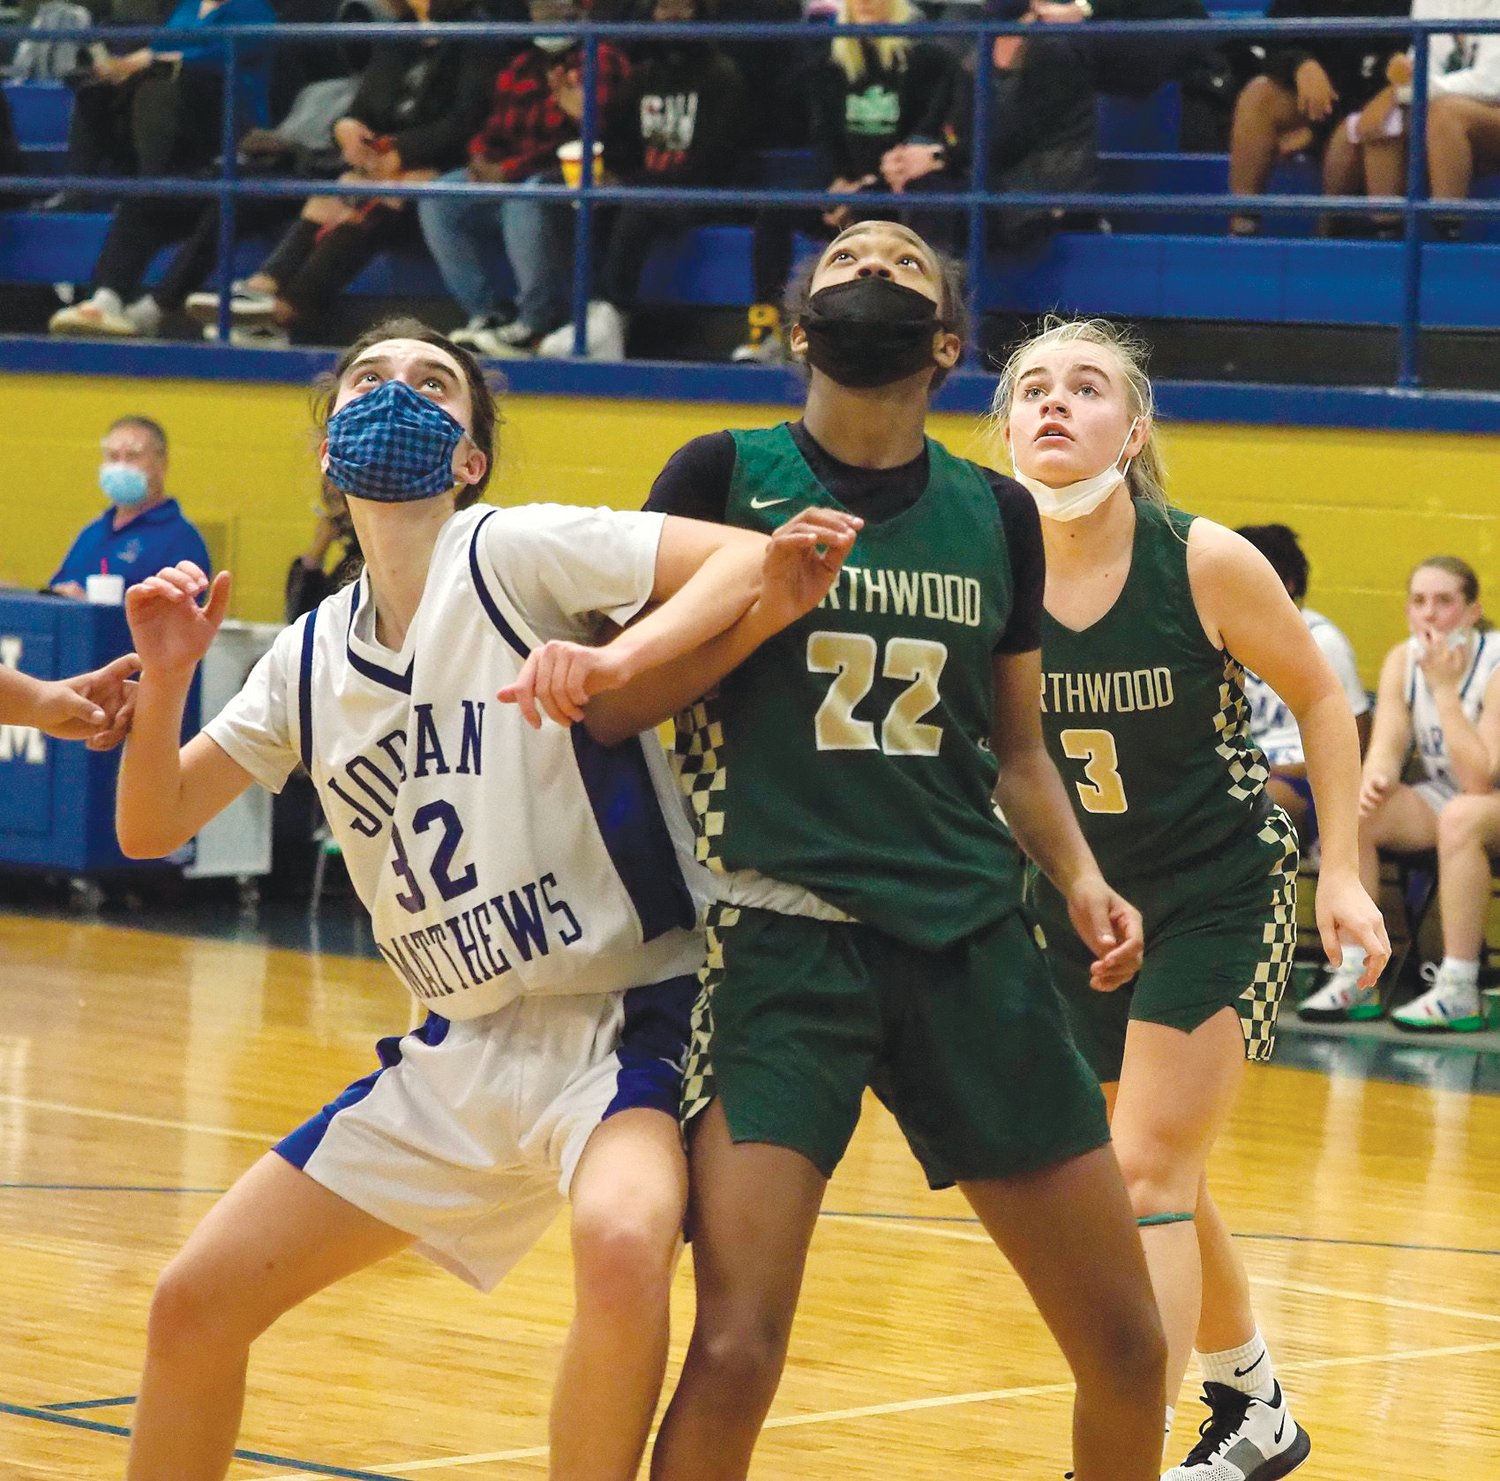 Jordan-Matthews junior Maggie Thornton (32) boxes out Northwood sophomore Skylar Adams (22) in the Chargers' 61-21 win over the Jets last Wednesday in Siler City.